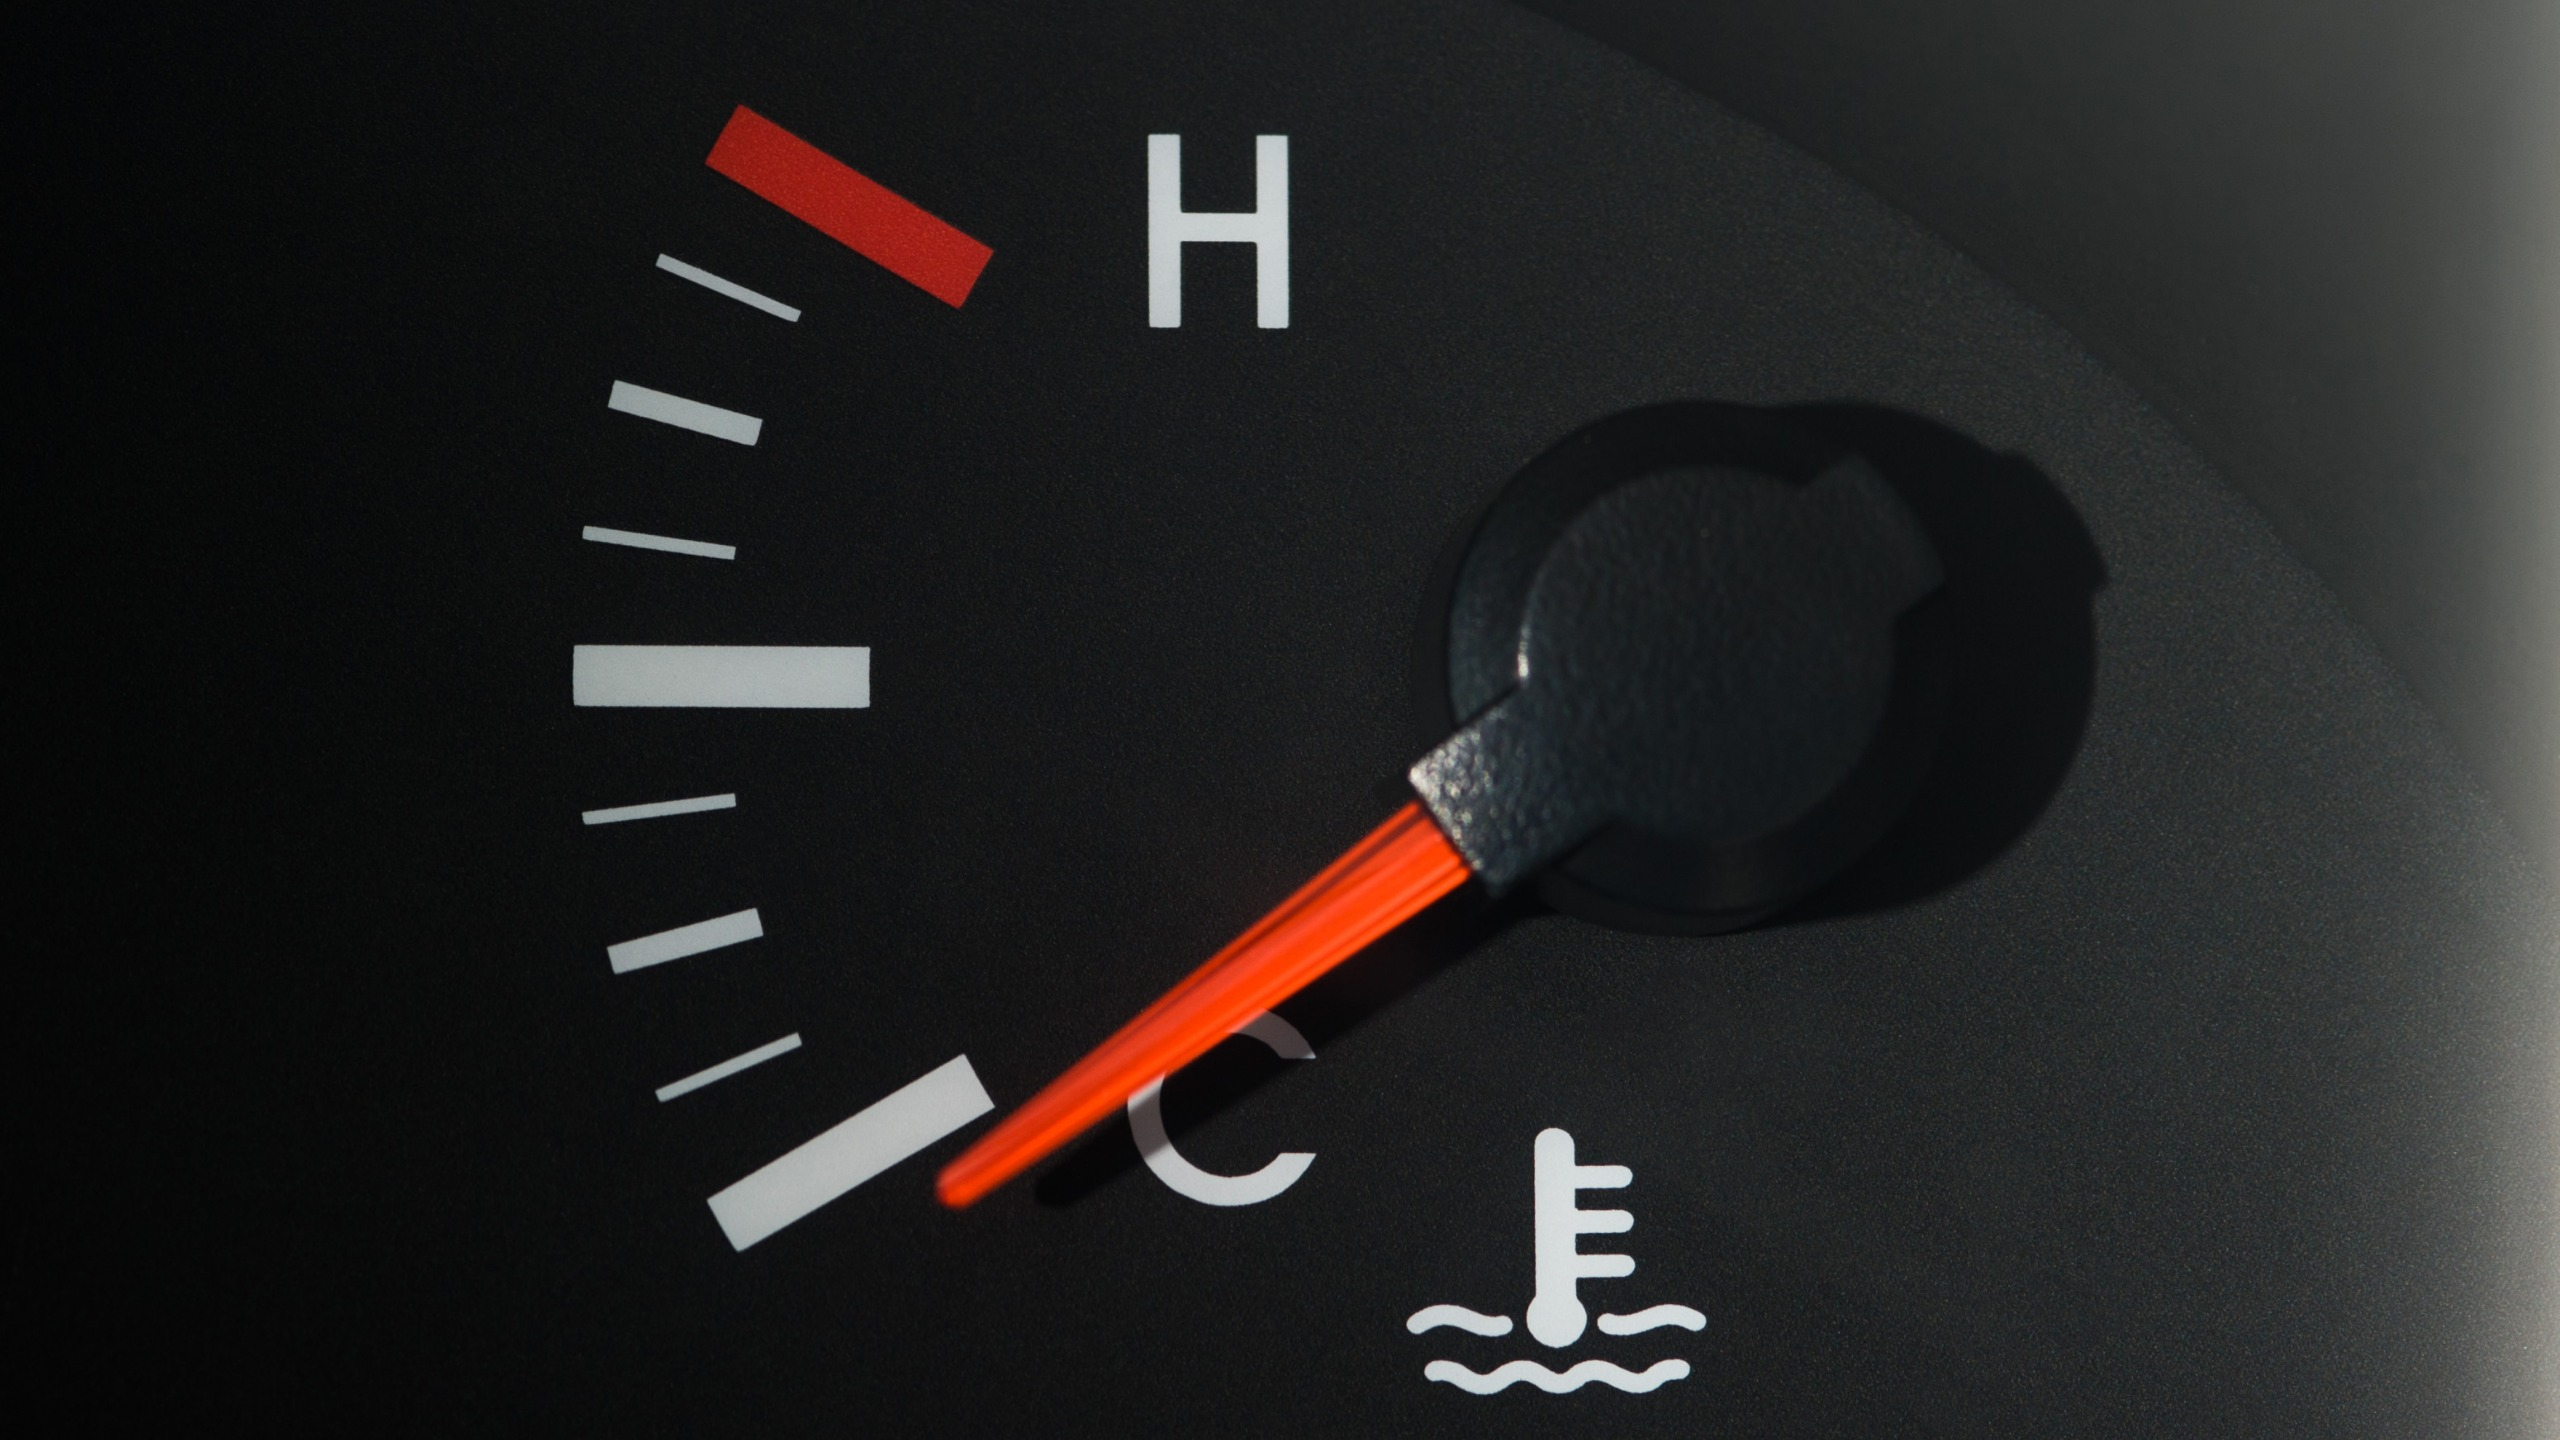 What To Know About a Car Temperature Gauge